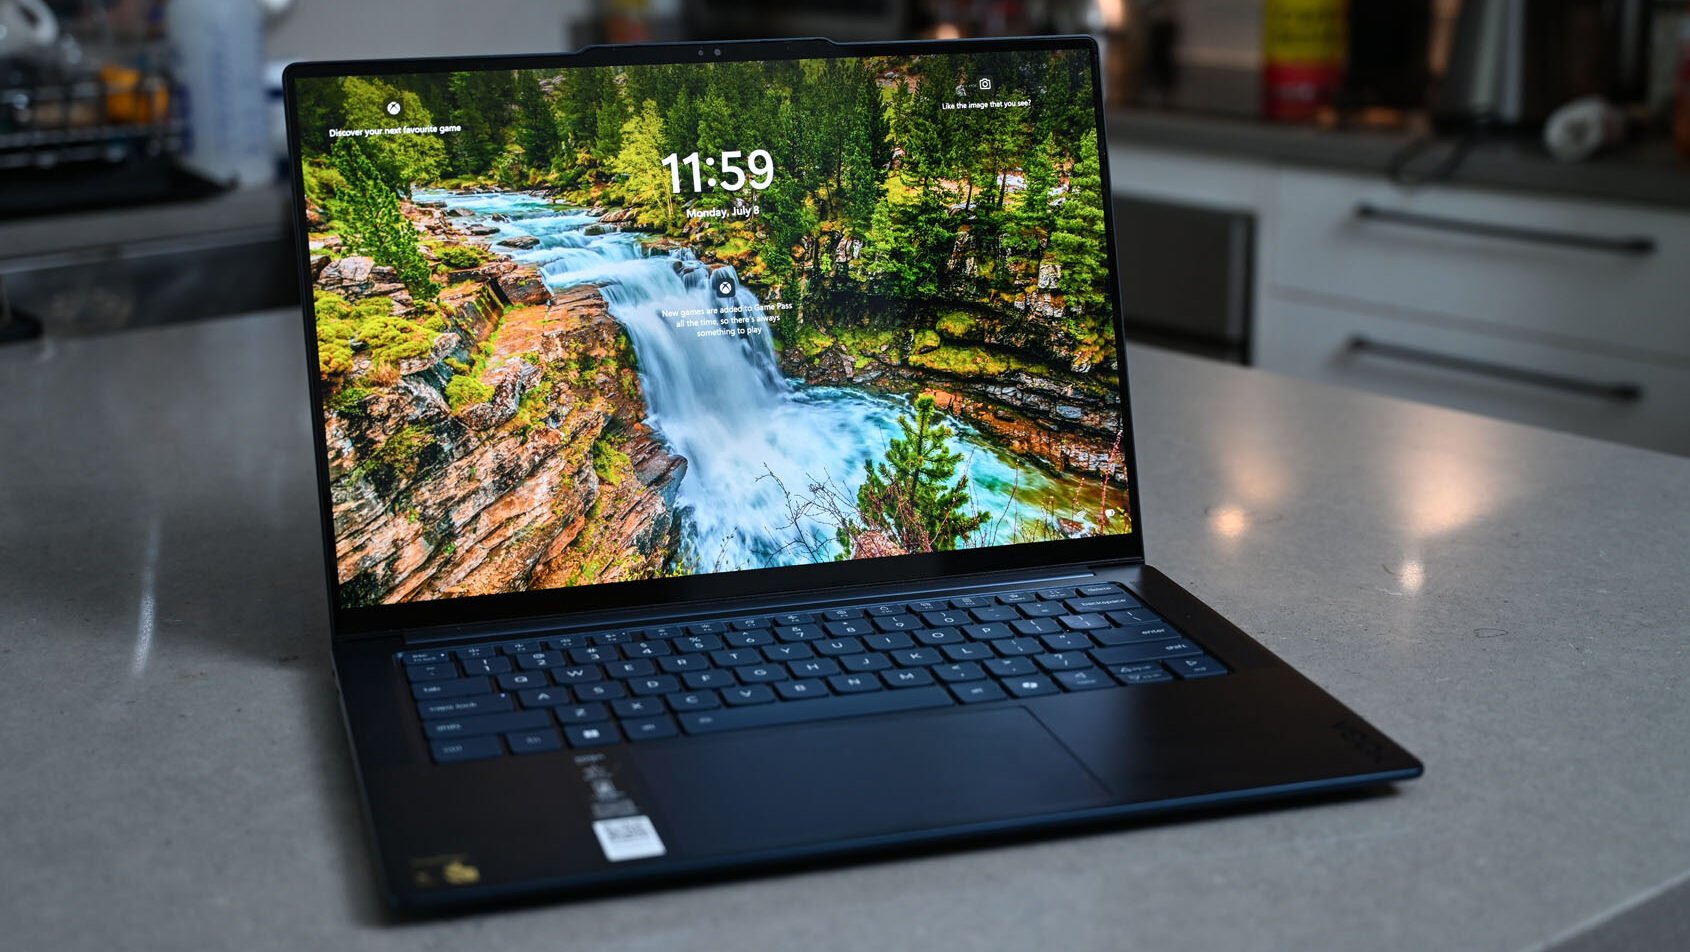 Lenovo Yoga Slim 7 Review: A Good Laptop With Lackluster AI Capabilities